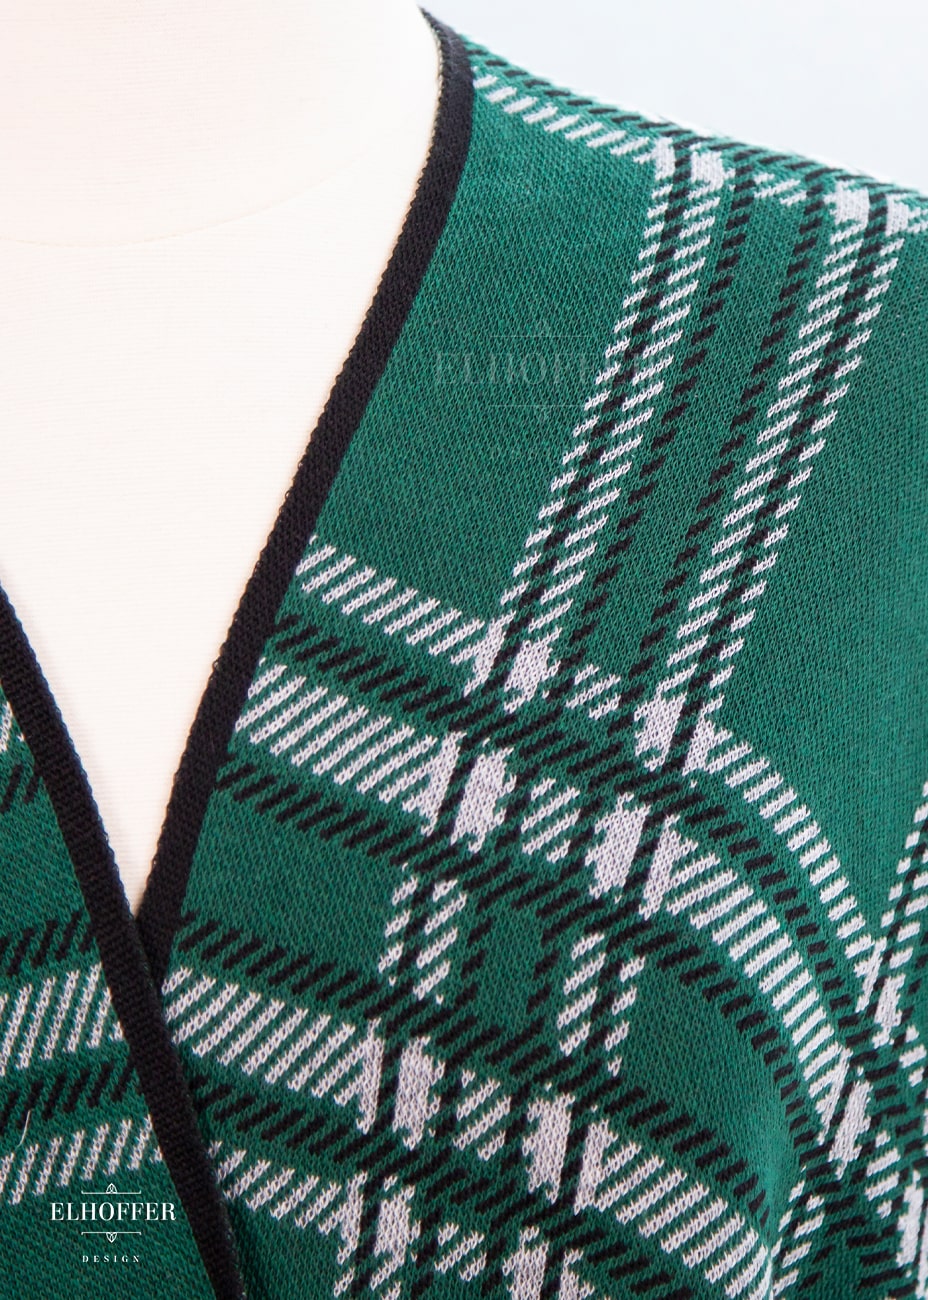 Close up of knit texture and tartan pattern.